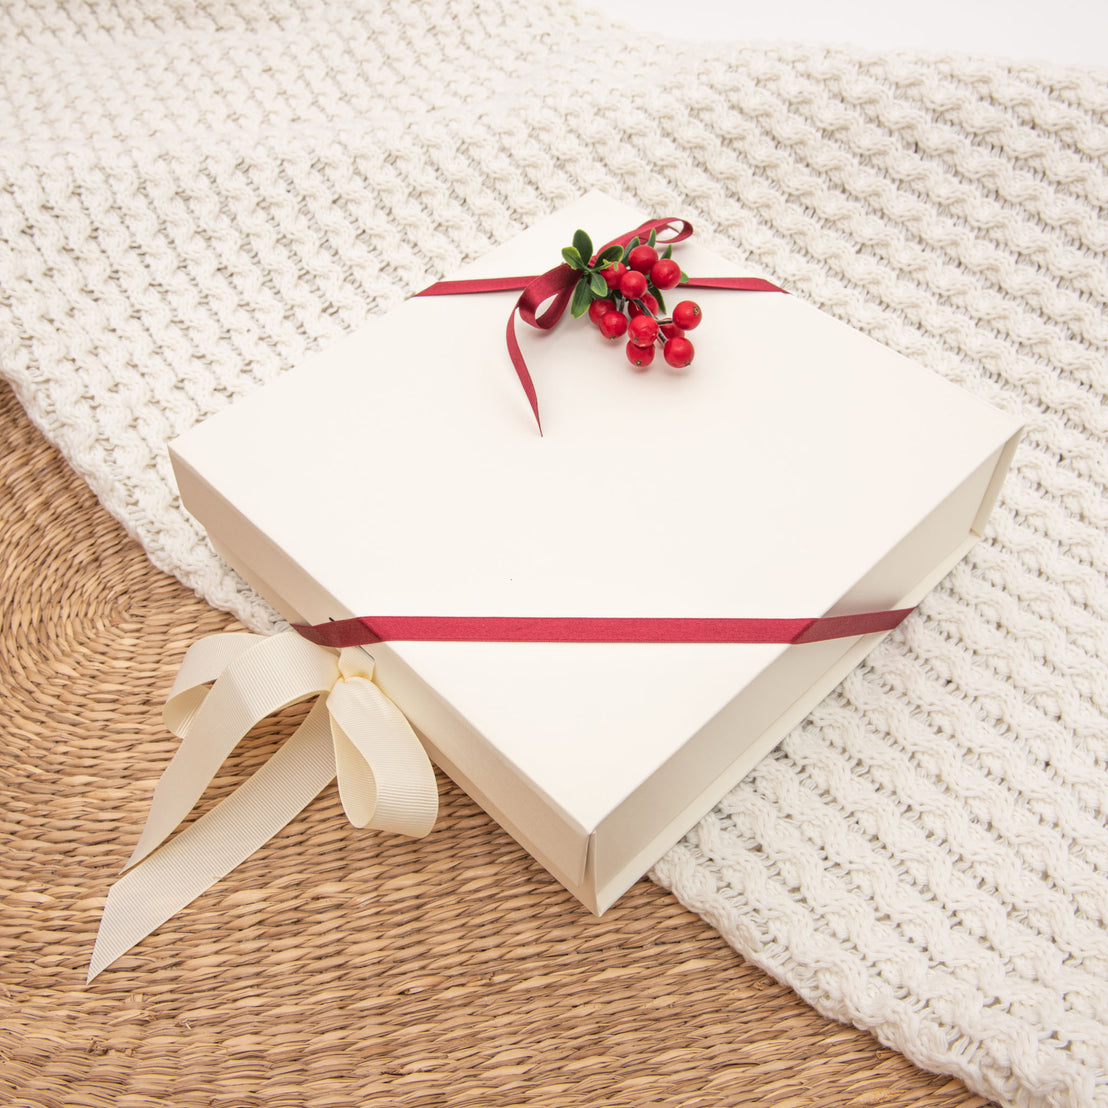 A square Christmas gift wrap tied with a red ribbon, adorned with red berries and green leaves on top, resting on a textured white-knit background.